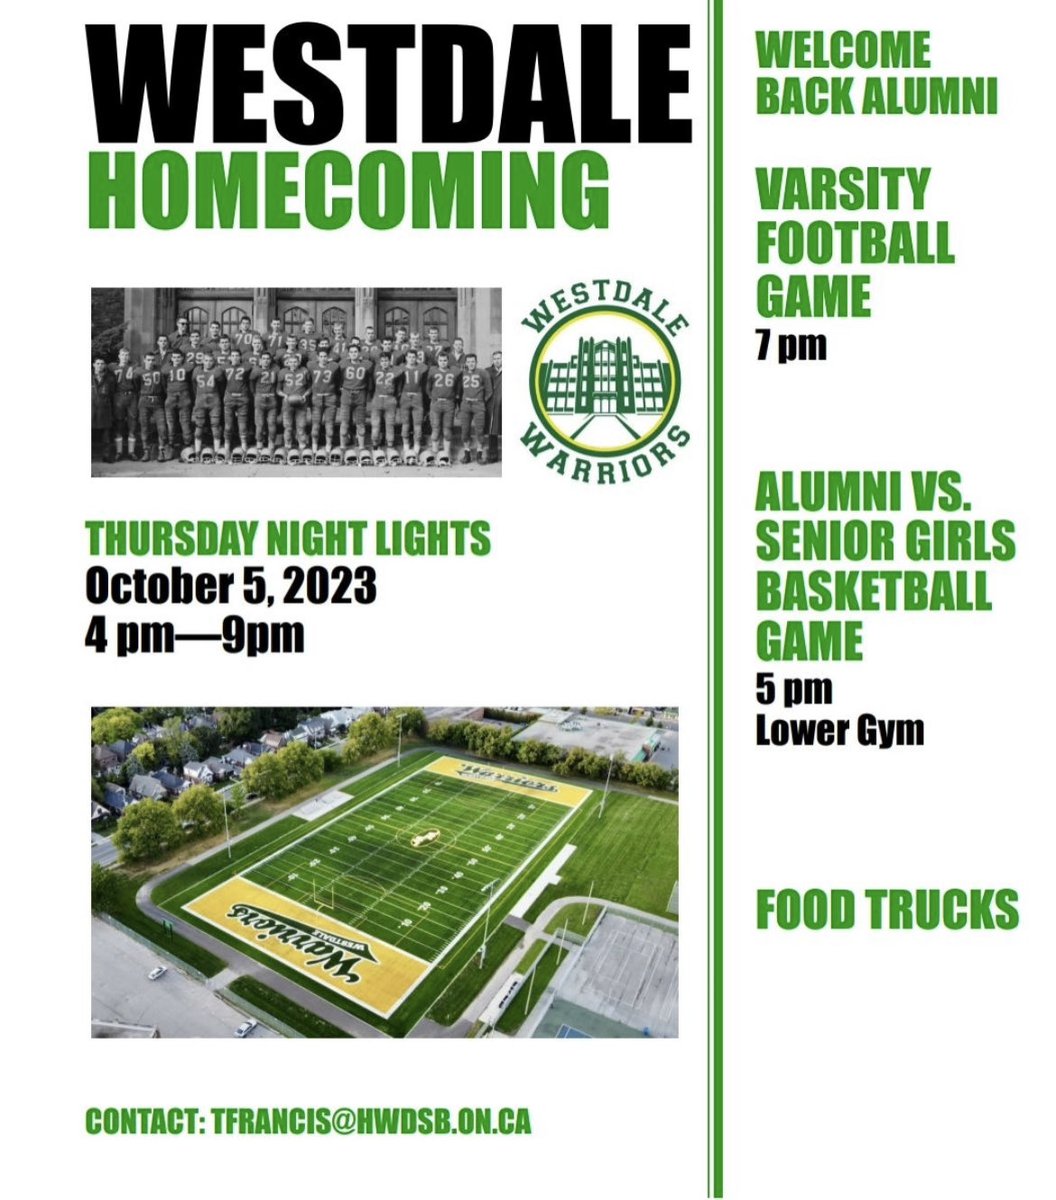 Westdale Secondary (@WestdaleSS) on Twitter photo 2023-09-29 14:20:57